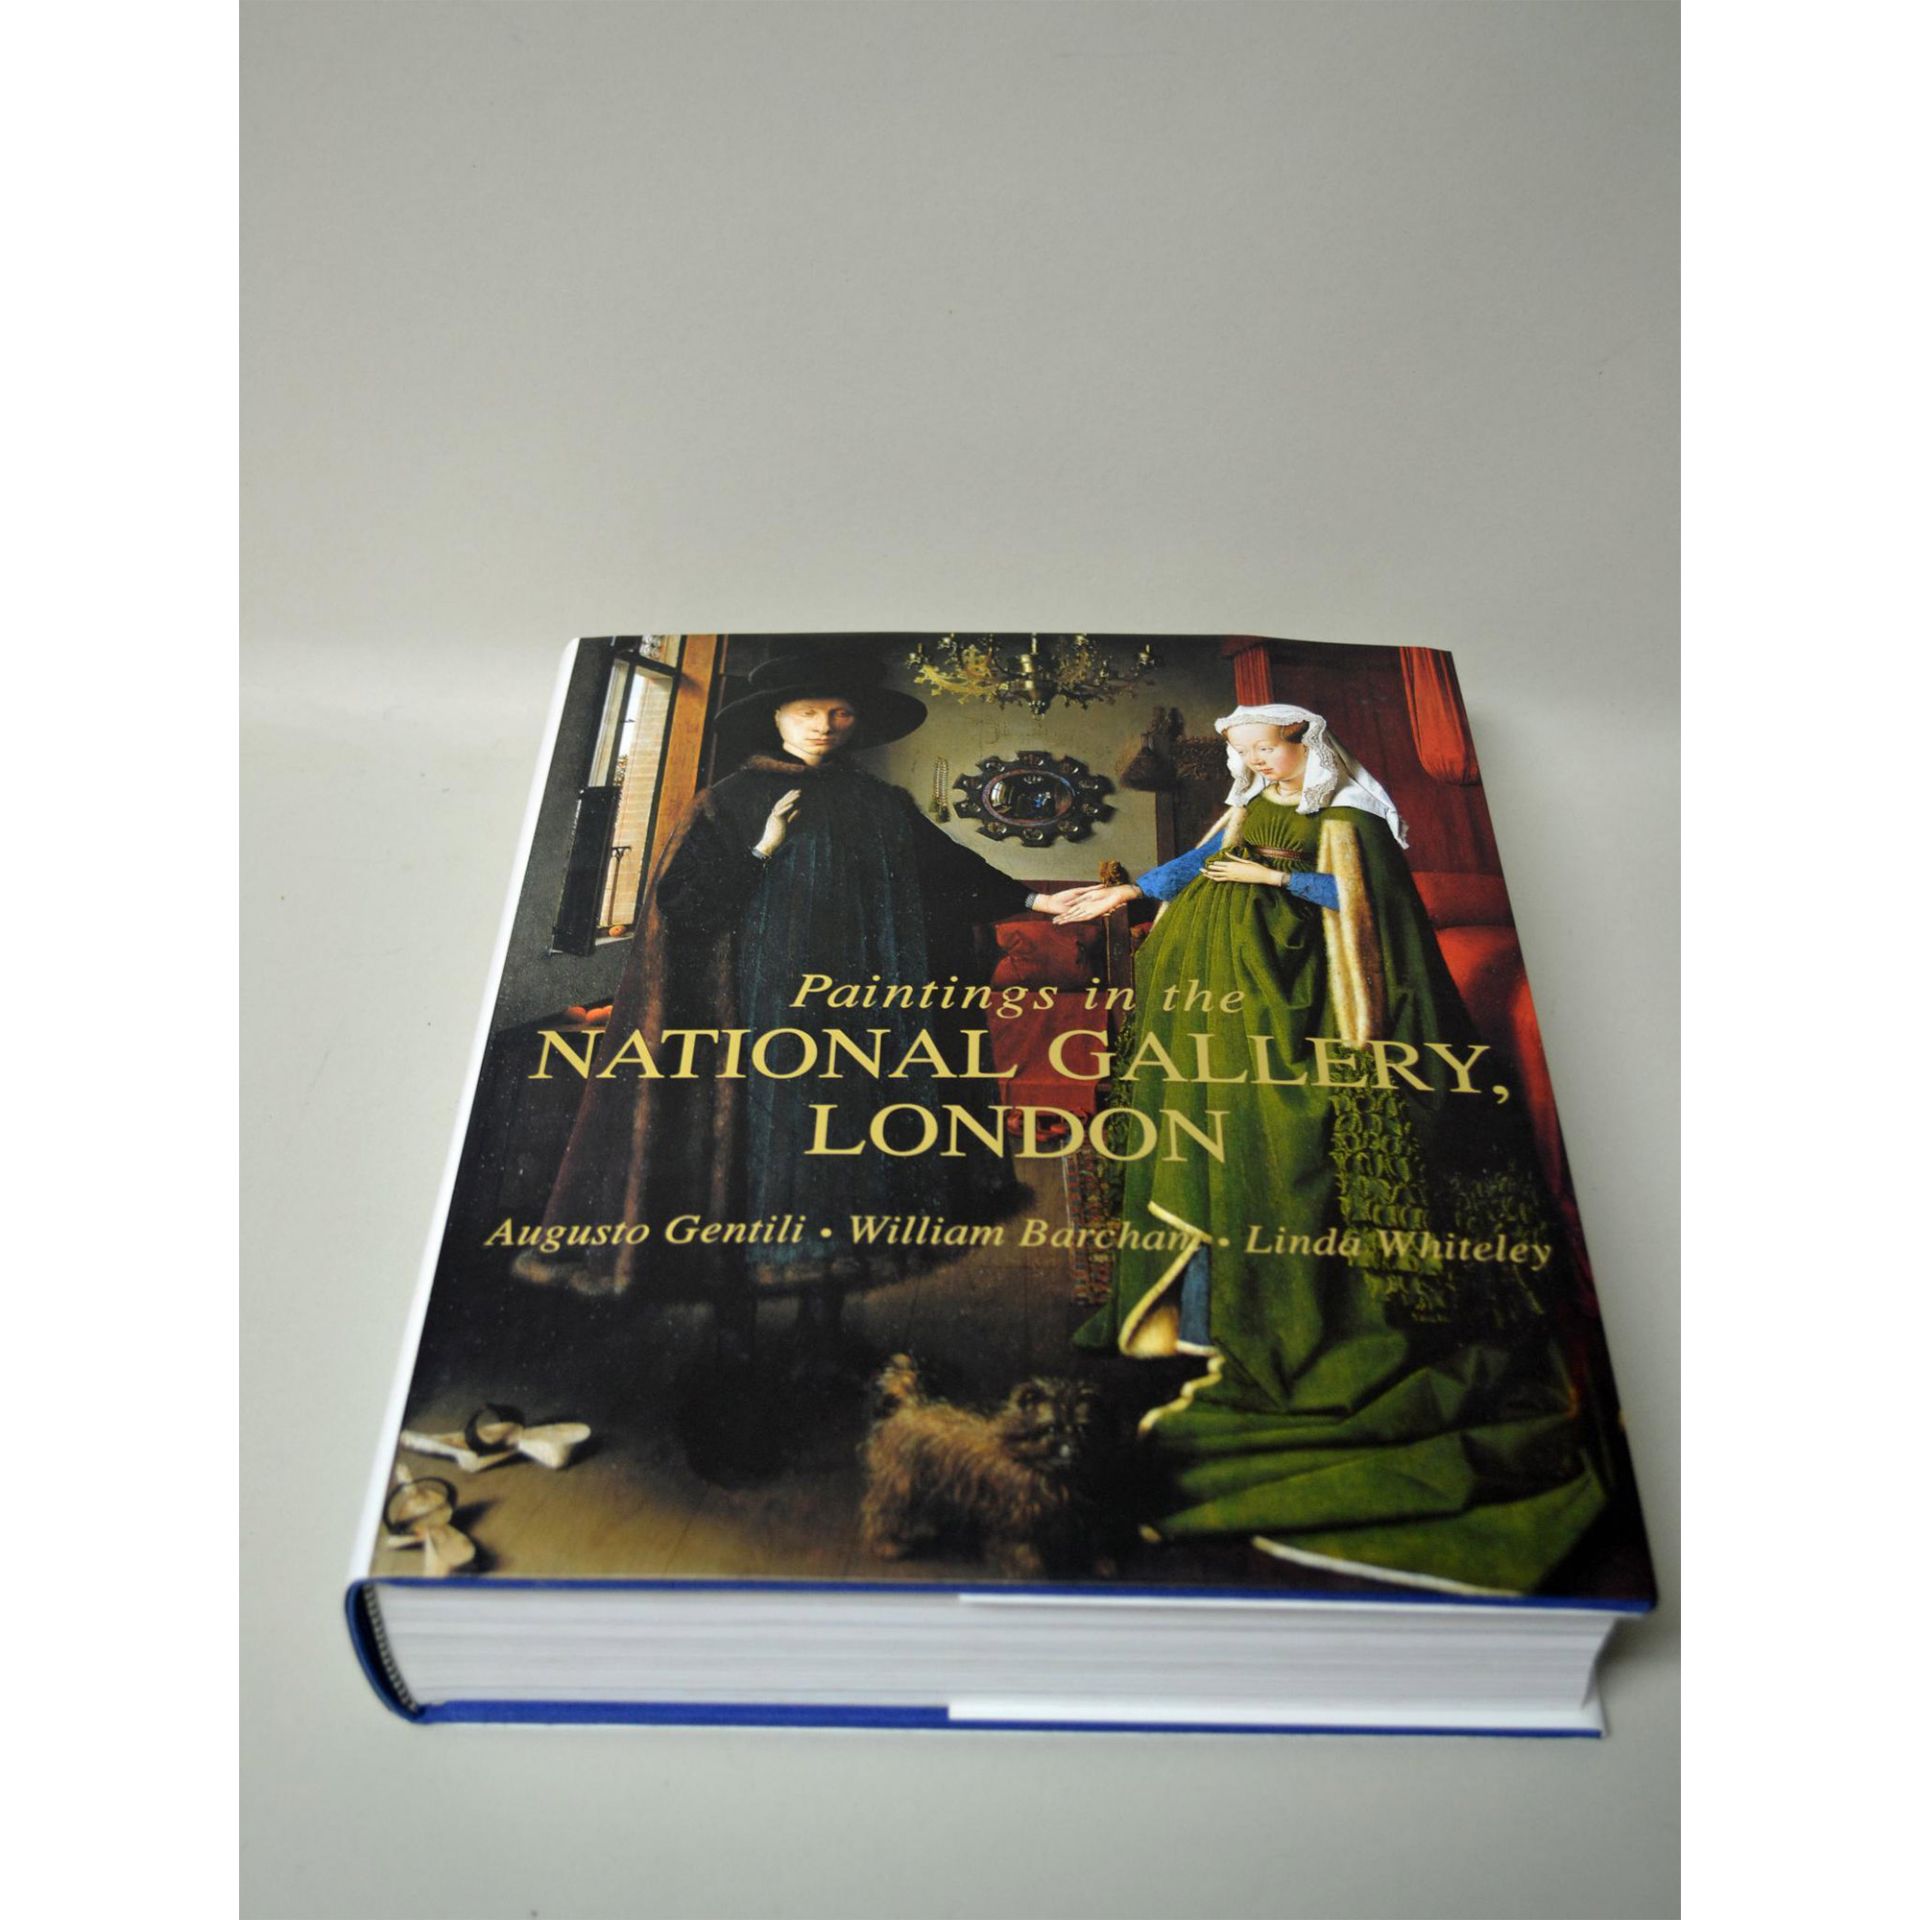 Art Reference Coffee Table Book "Paintings In The National Gallery London, 550 Color Illustrations